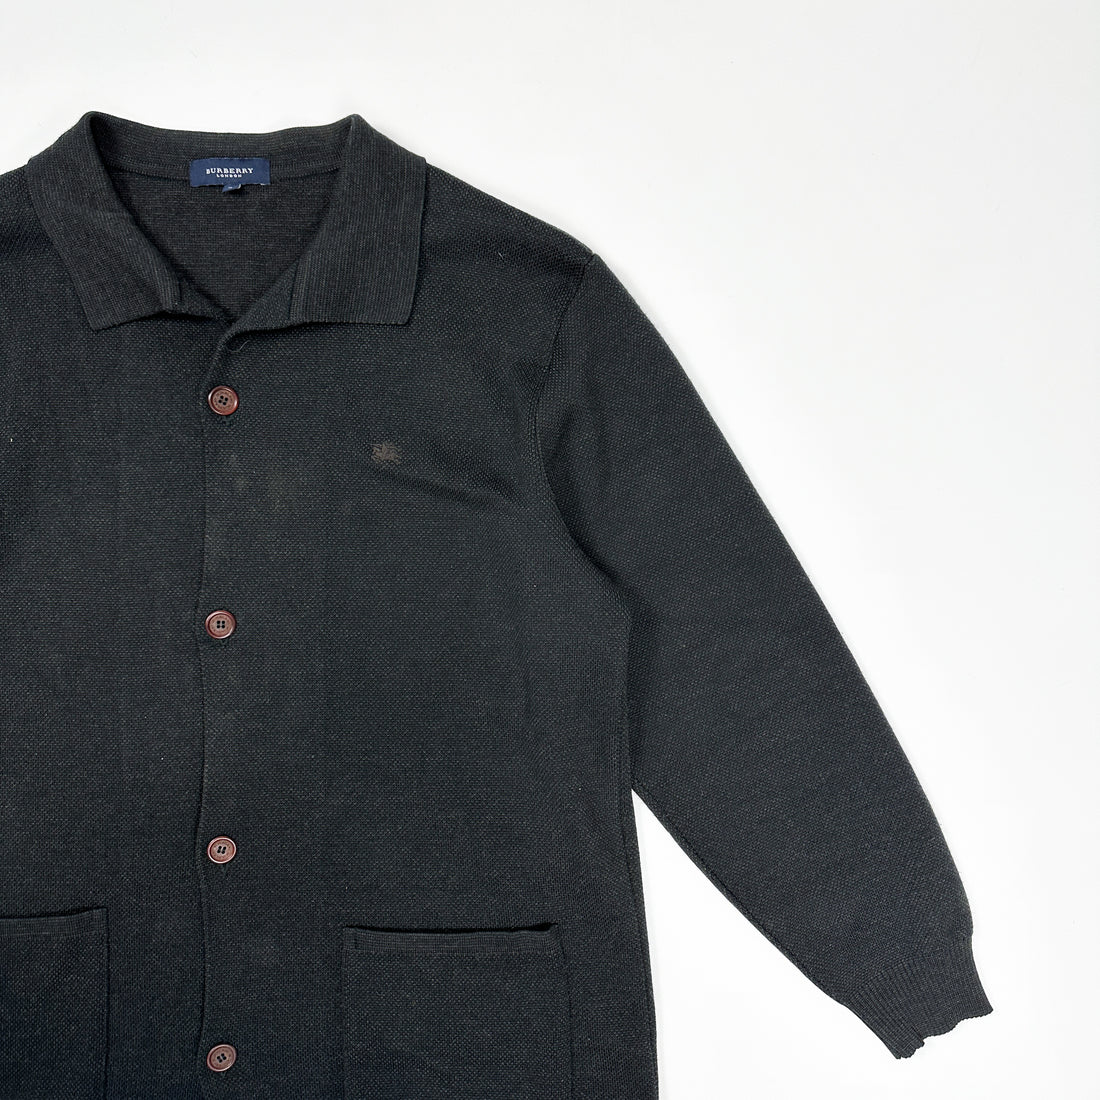 Burberry Wool Buttoned Up Cardigan 1990's